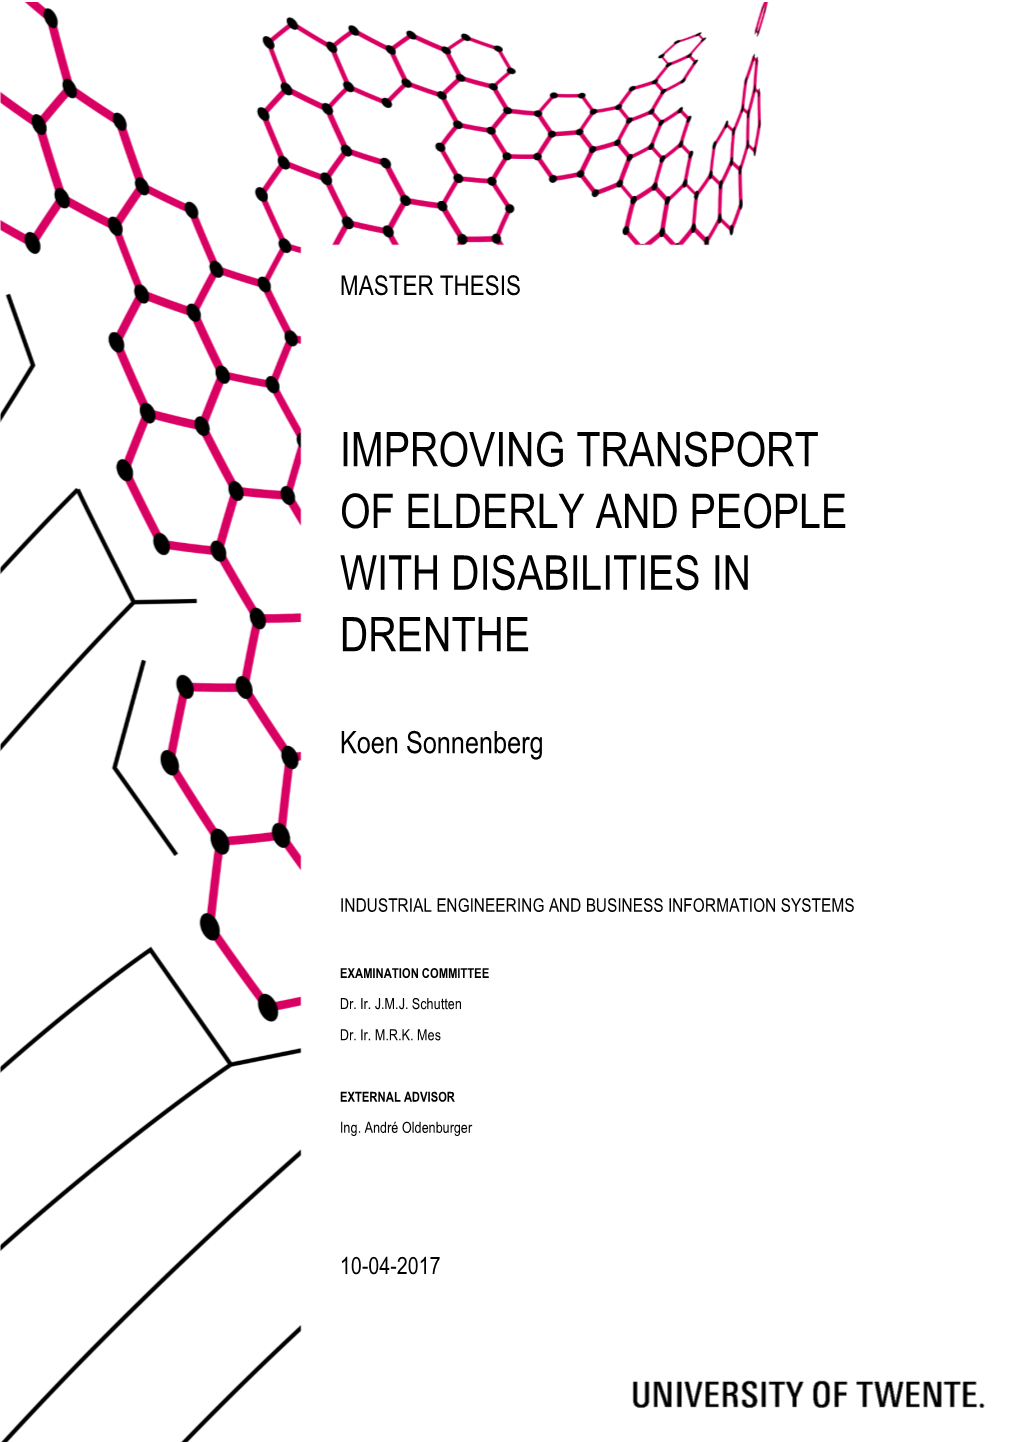 Improving Transport of Elderly and People with Disabilities in Drenthe